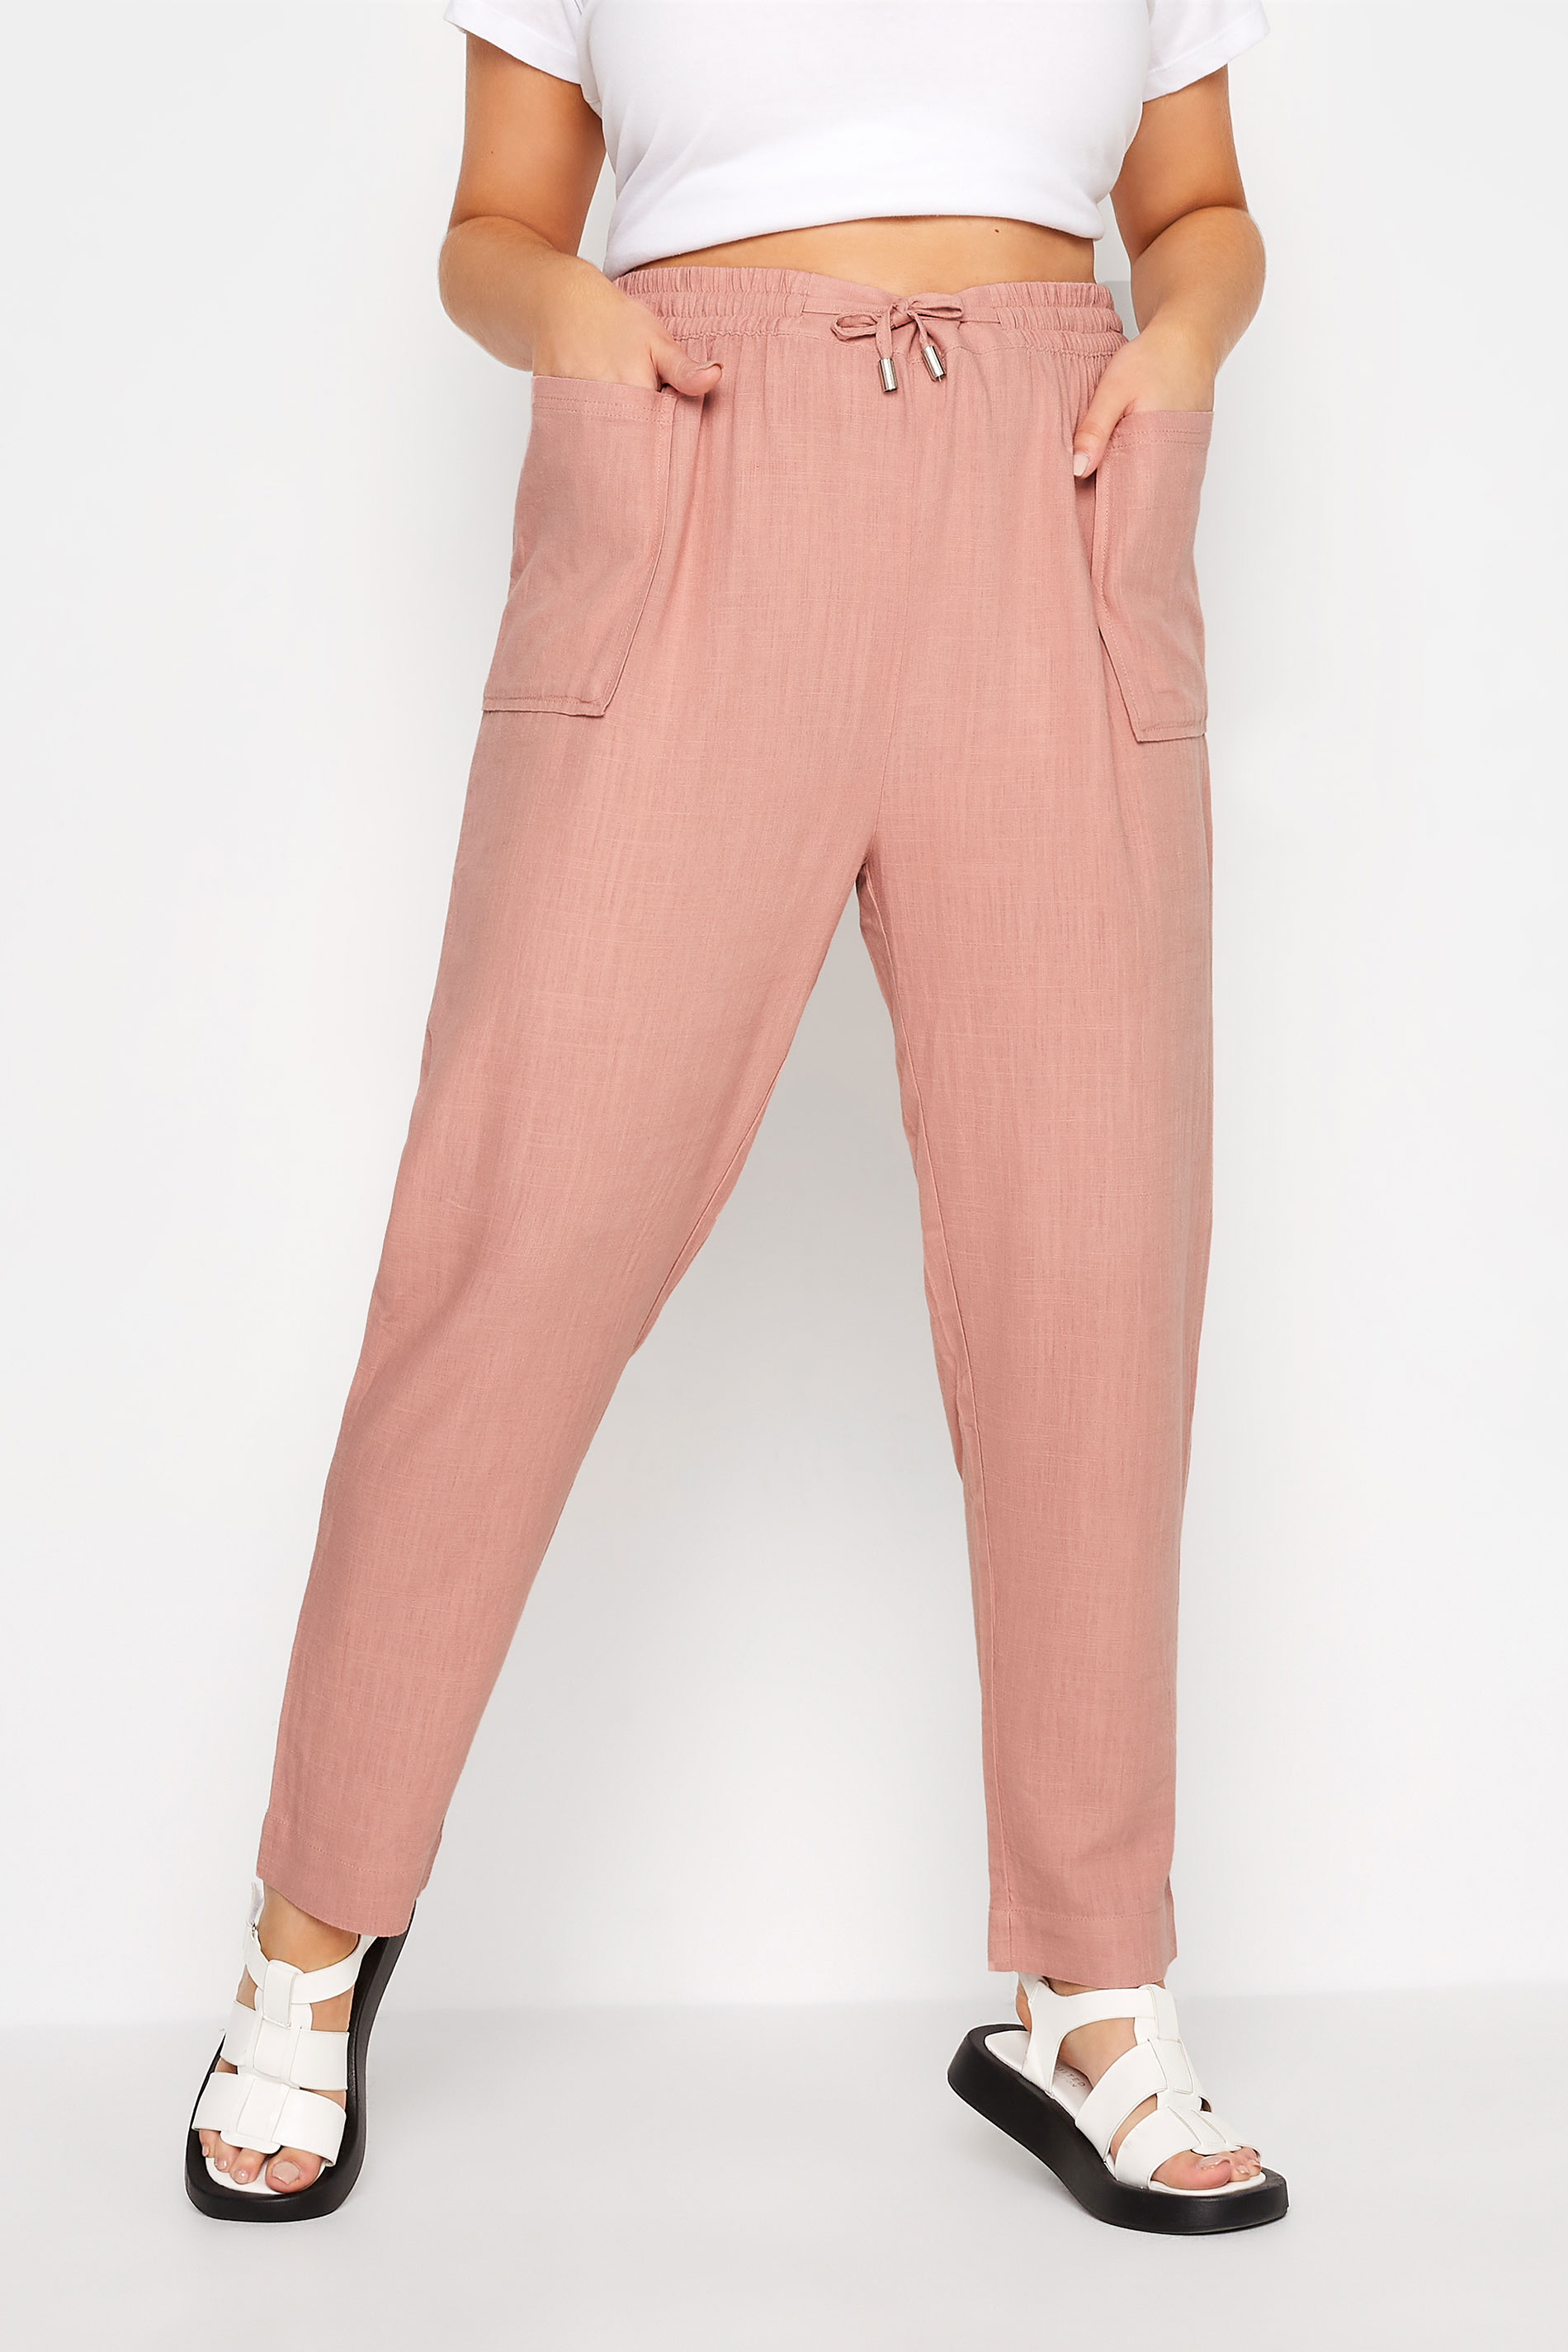 Plus Size Rose Pink Linen Blend Joggers | Yours Clothing  1